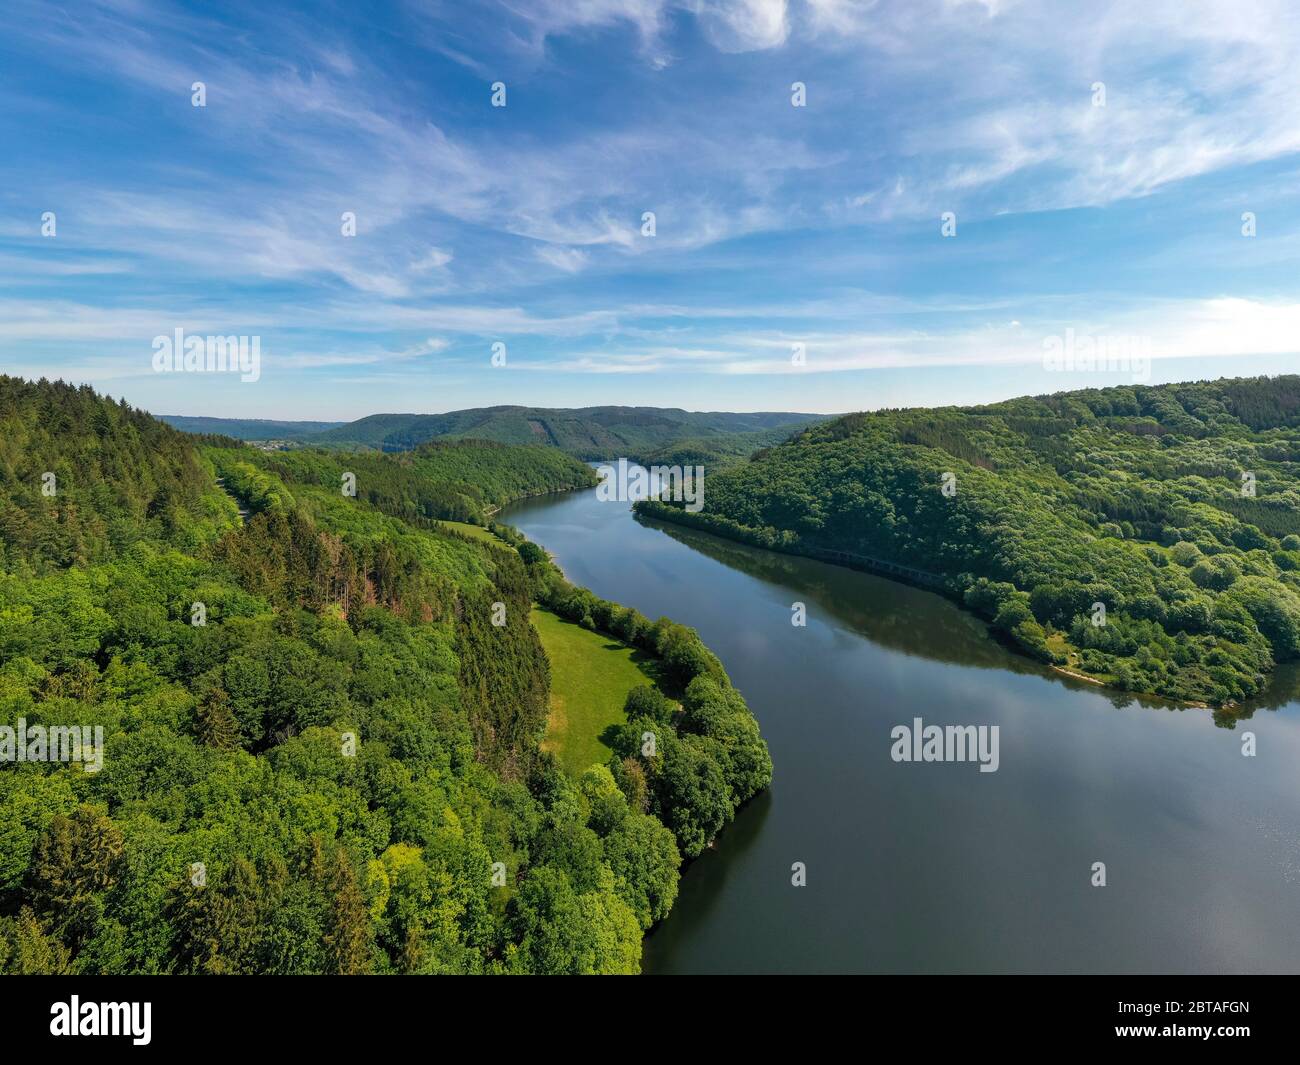 Aerial view of the Obersee (Upper Rursee), a reservoir lake in the Eifel Mountains, Einruhr, Simmerath, North Rhine-Westphalia, Germany, Europe Stock Photo